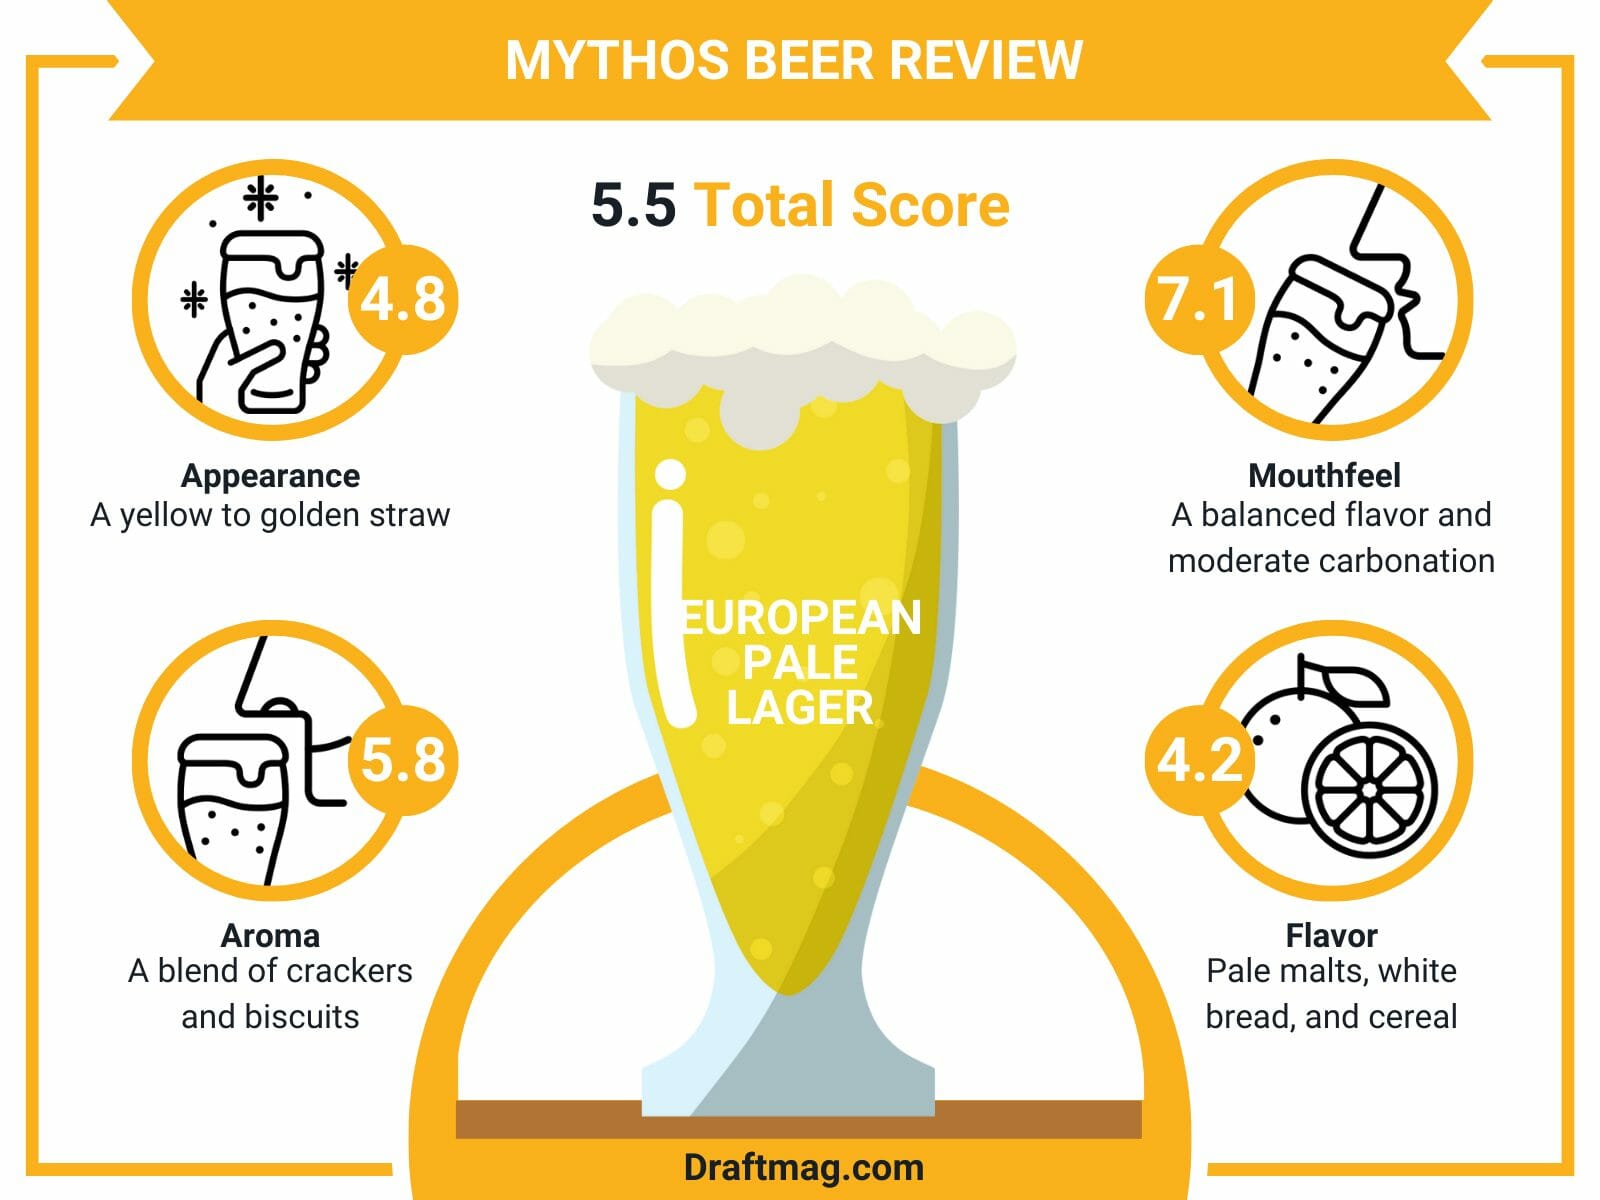 Mythos beer review infographic